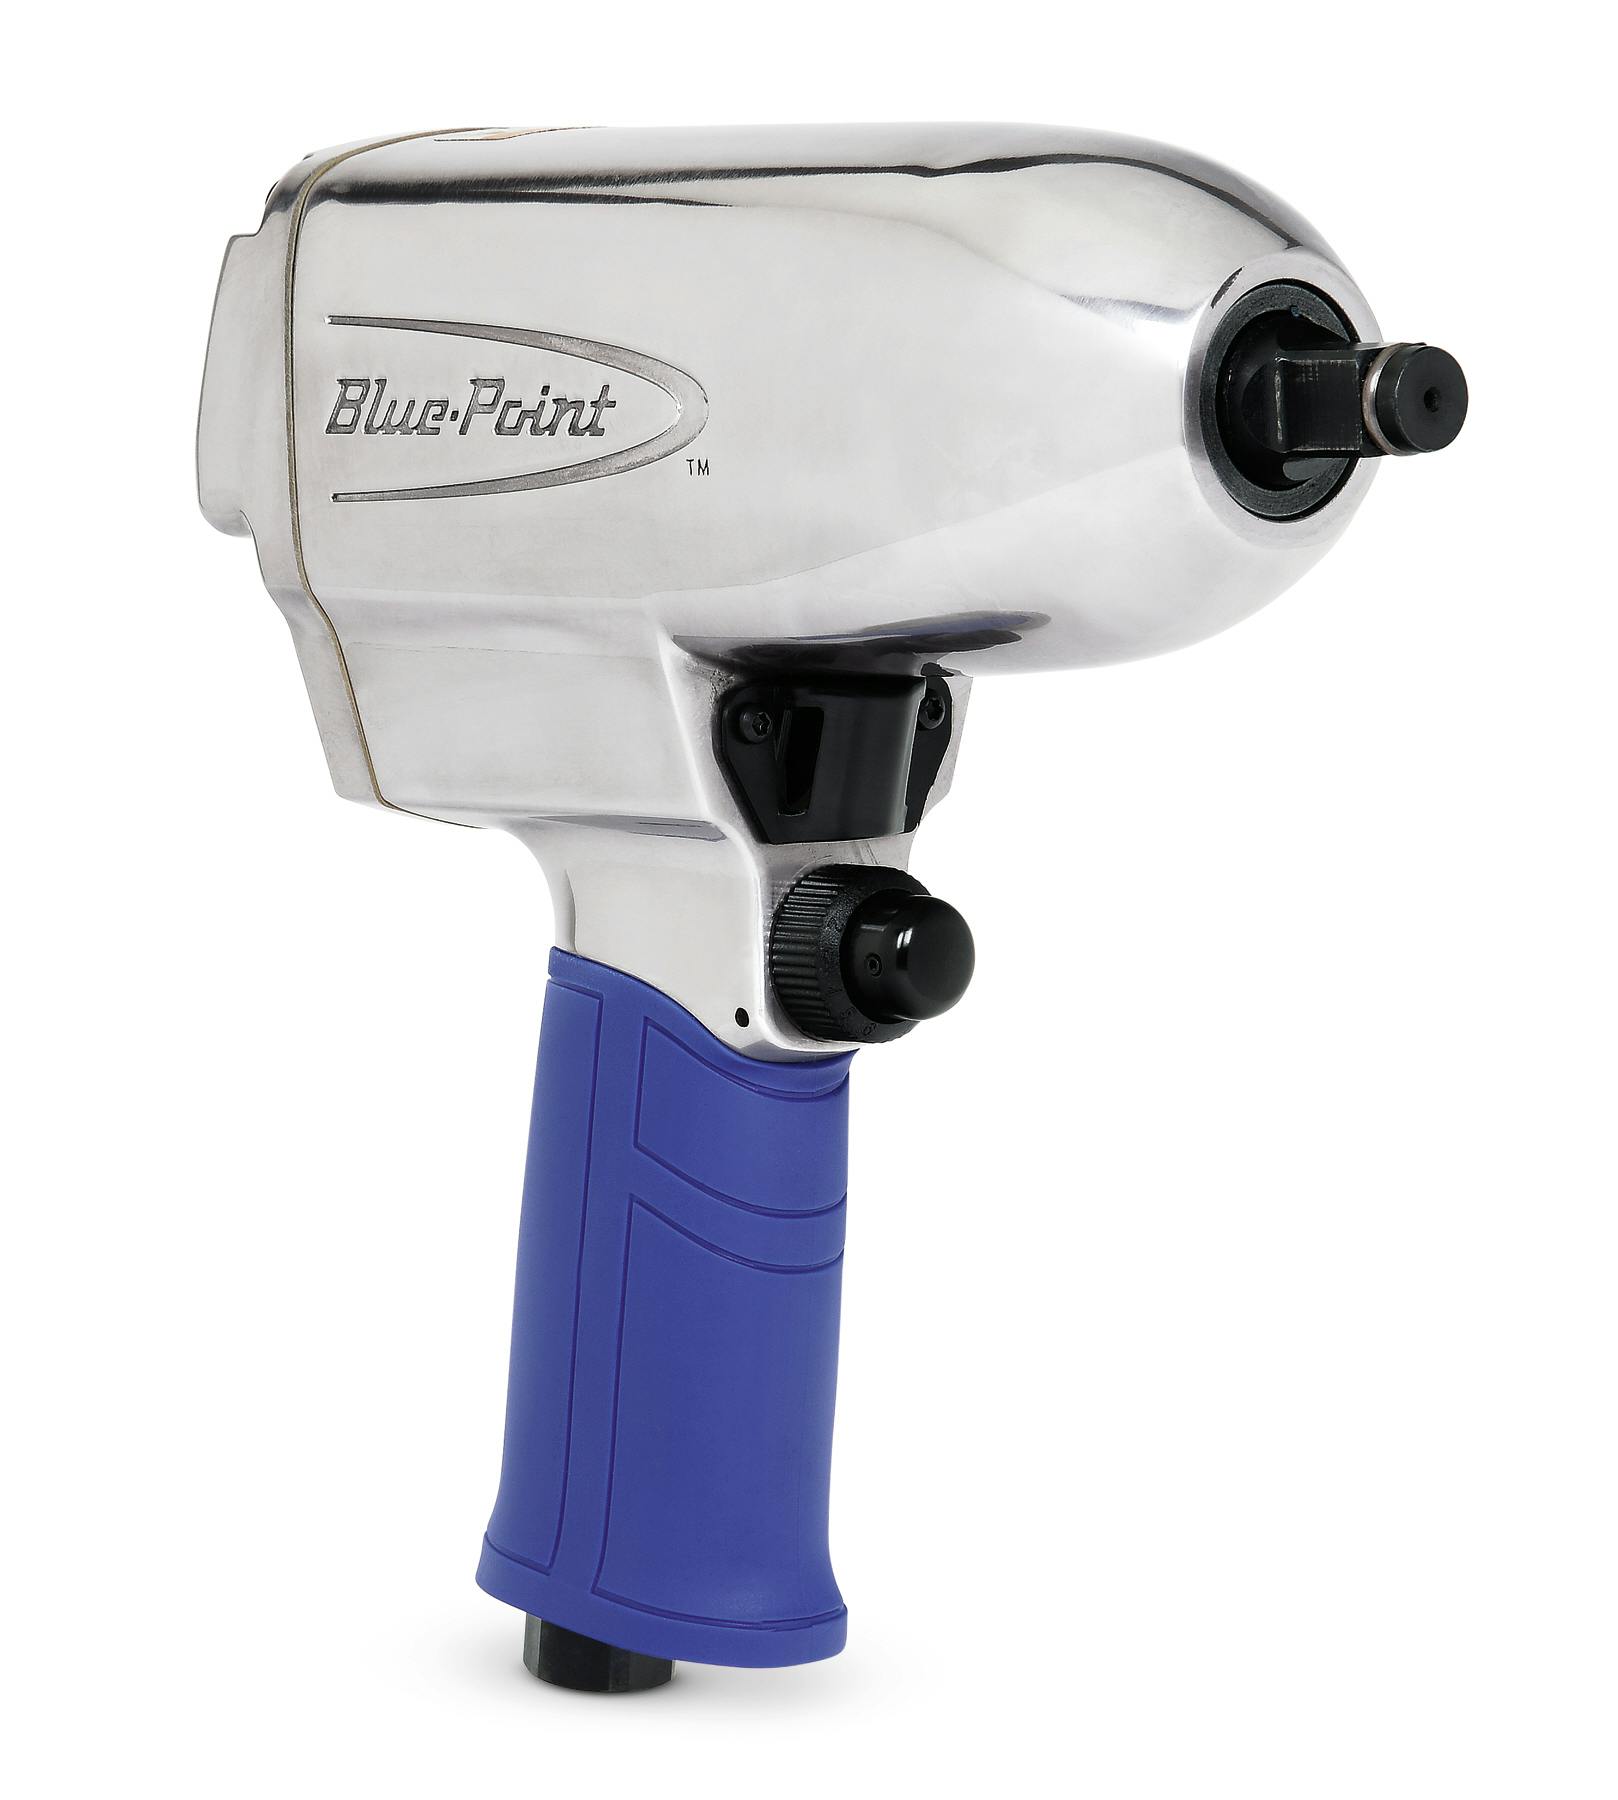 Blue point AT123 1/2" Drive Air Impact Wrench Gun Protective Boot 